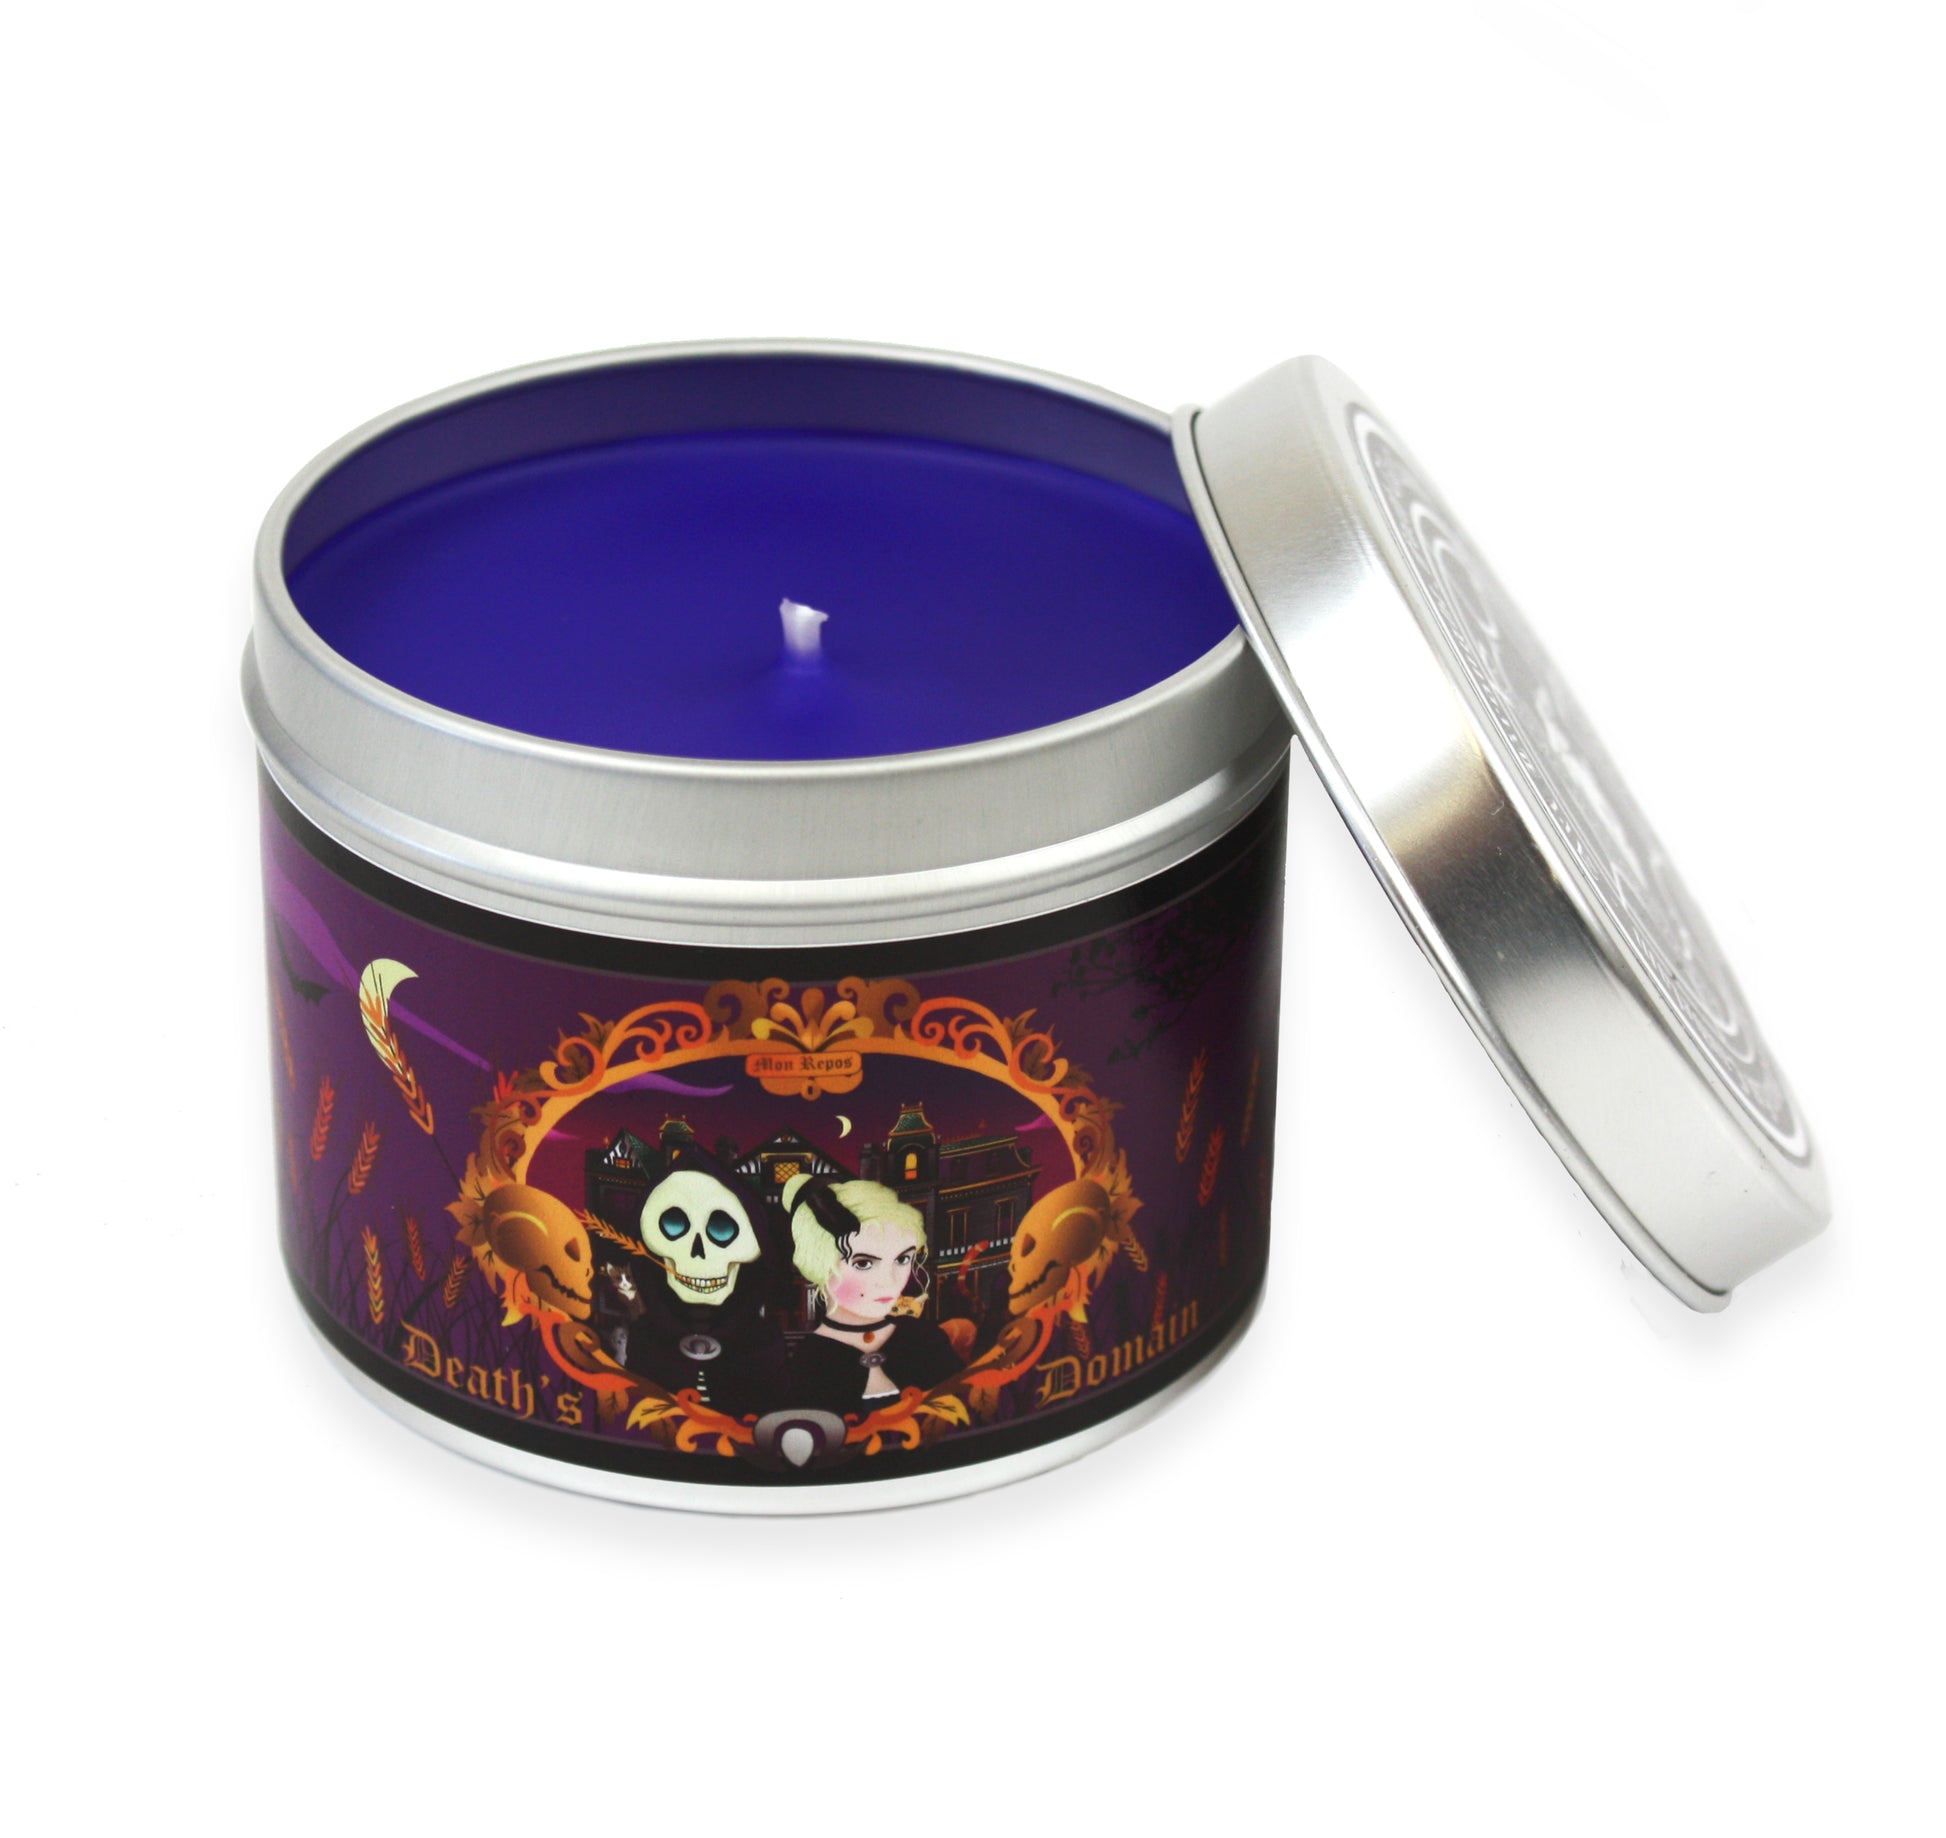 Death's demise discworld inspired scented candle from Happy Piranha.